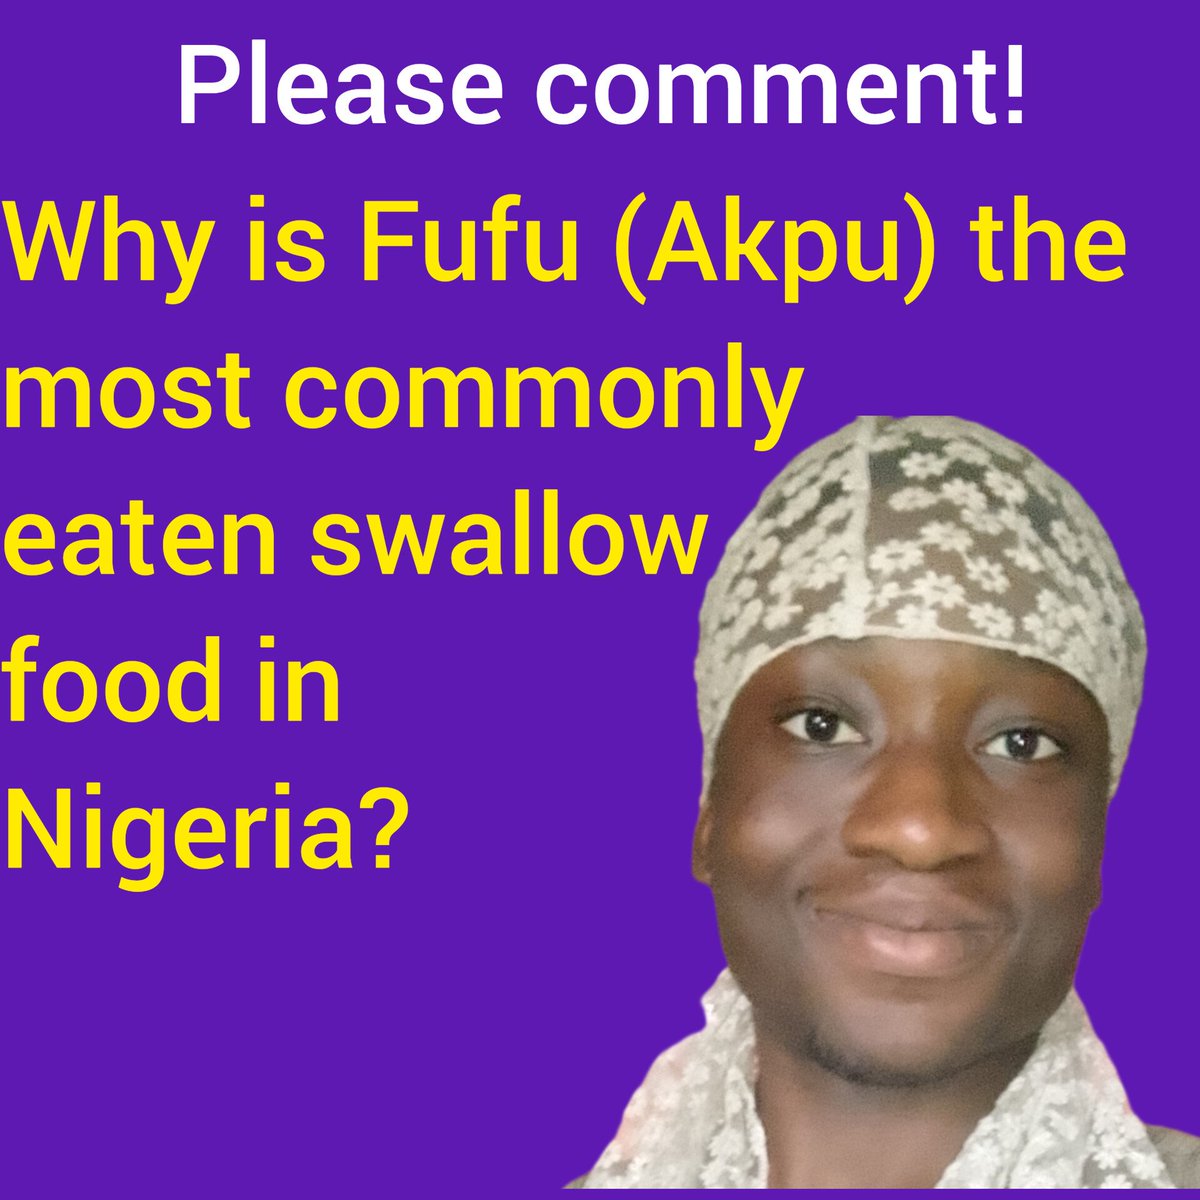 Why is Fufu (Akpu) the most commonly eaten food in Nigeria?
#fufu #akpu #food #foodies #trendy #popular #viral #nigeria #meals #questionoftheday #instagramfoods #chefs #gluttons #charving.#swallowfoods follow me @hereissulabi for more interesting posts.